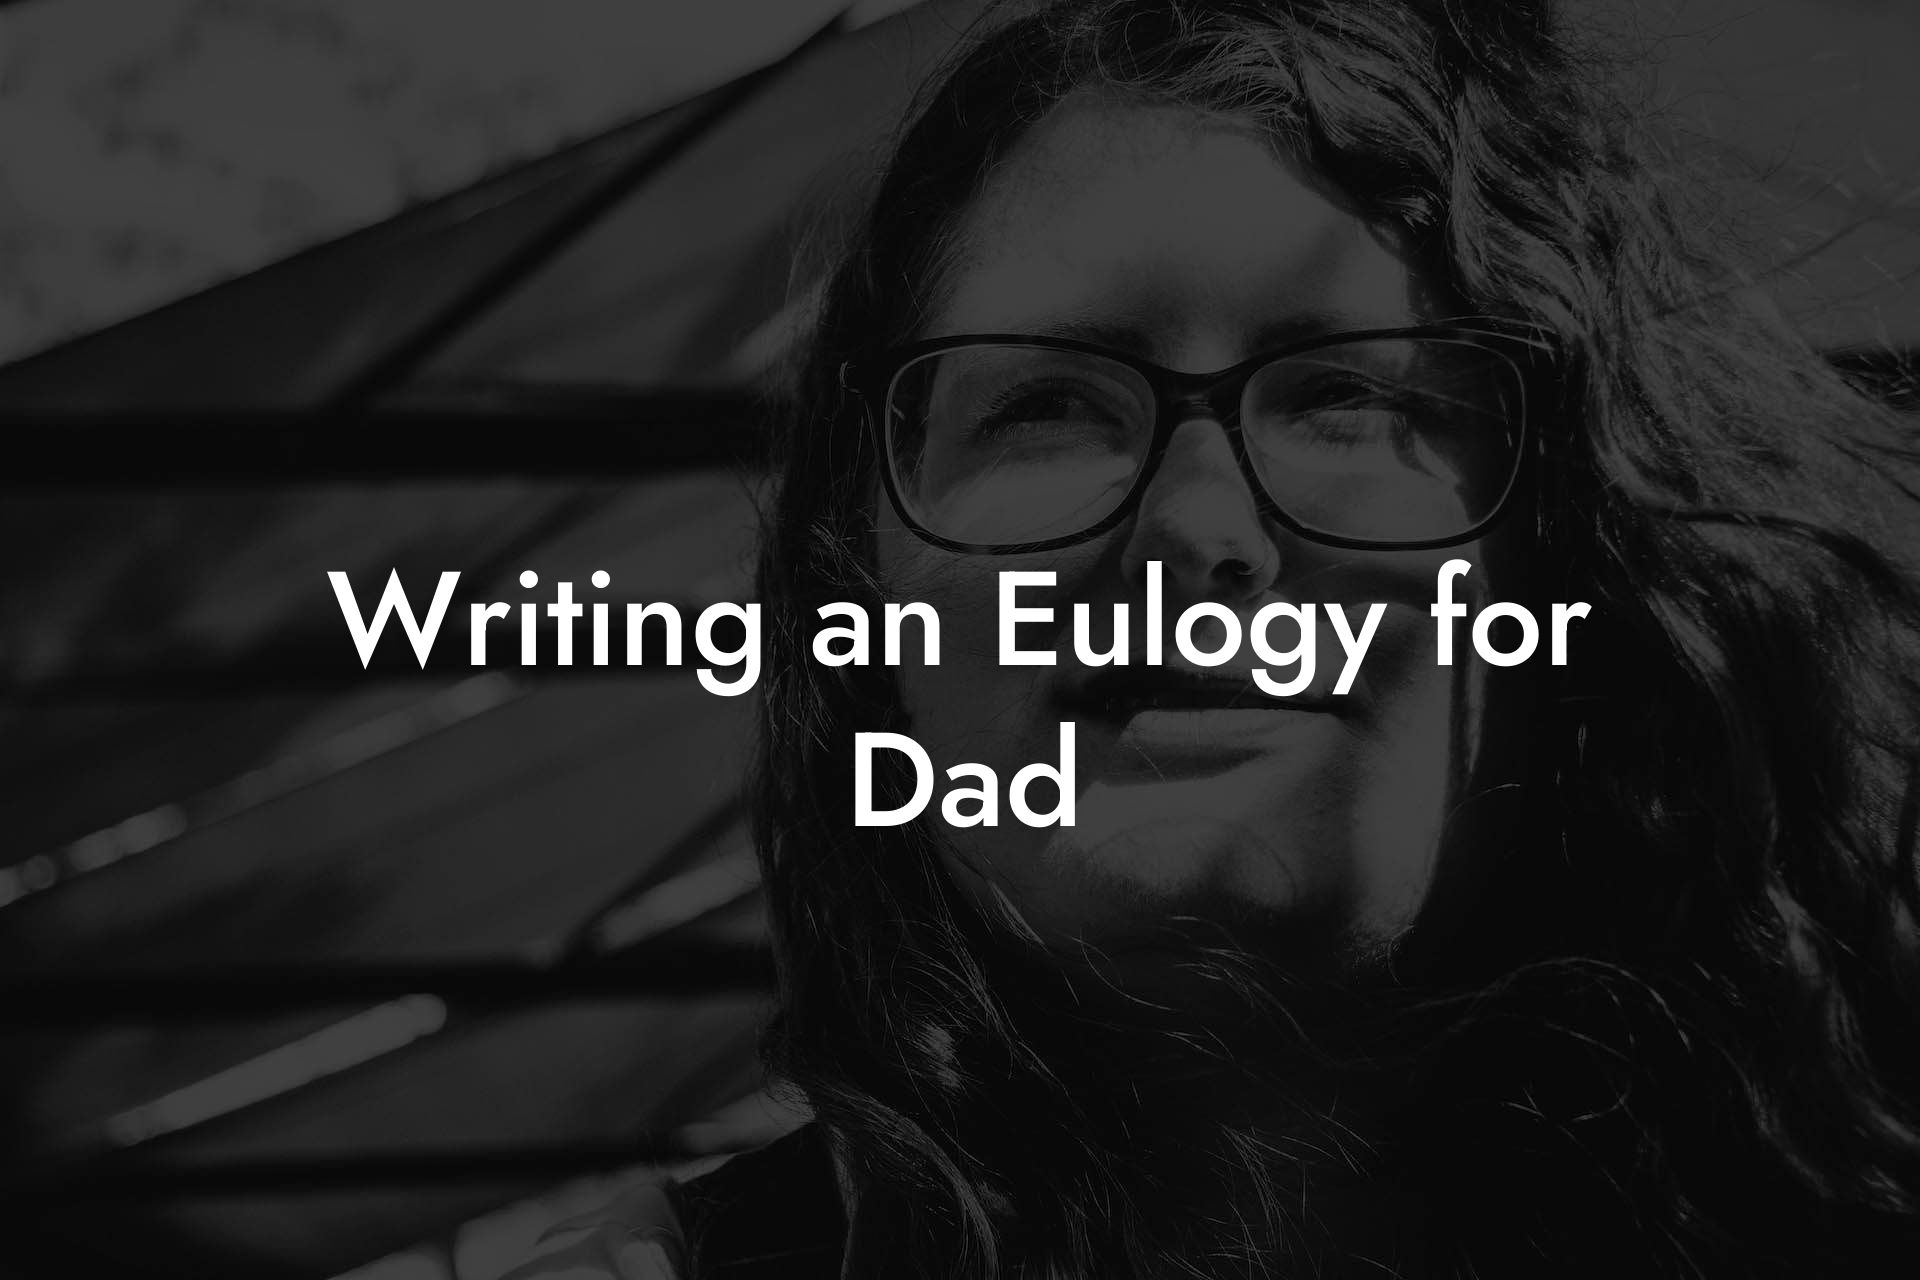 Writing an Eulogy for Dad